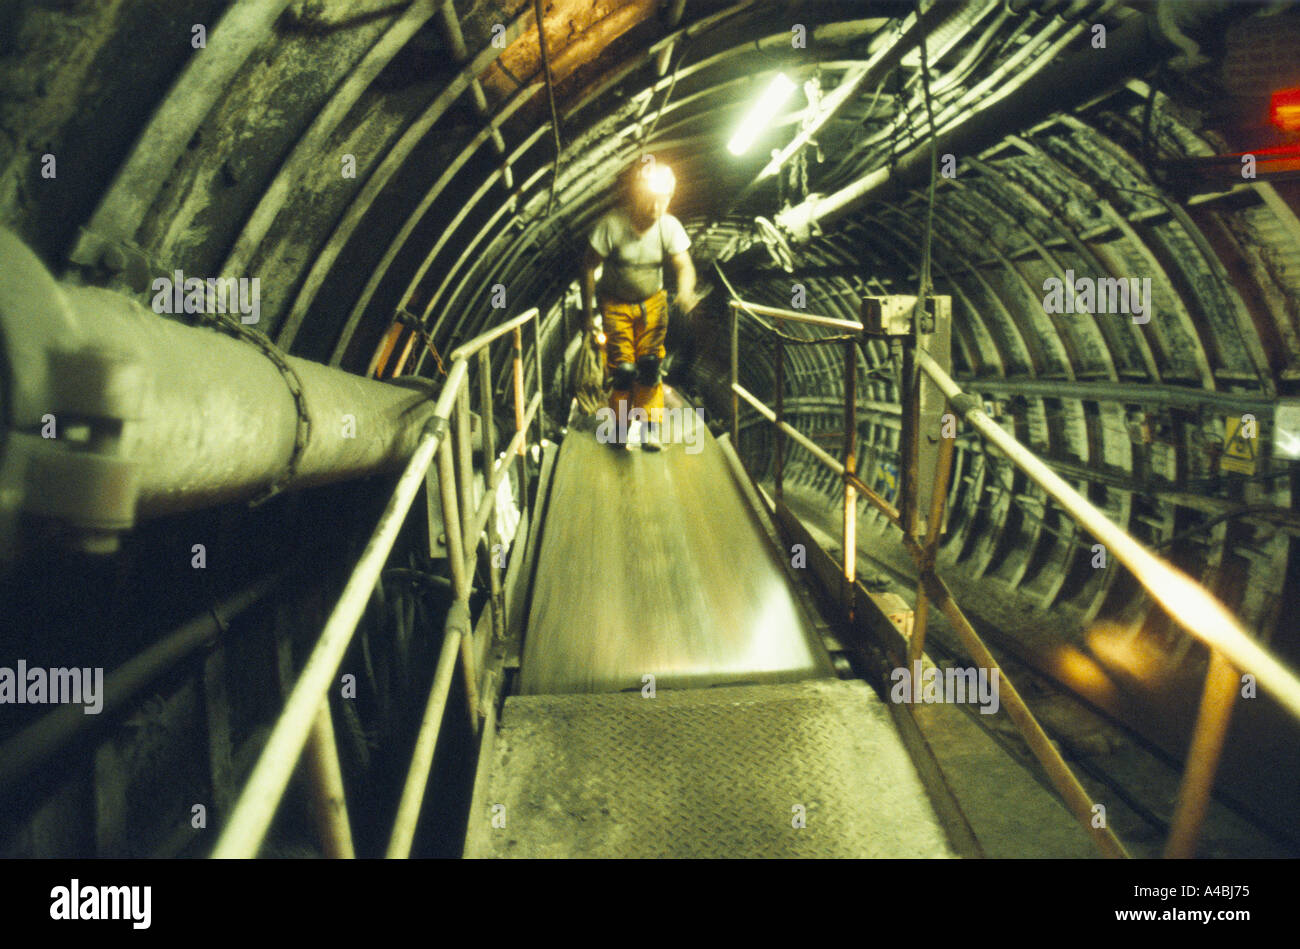 MINER WITH HEAD TORCH & SAFETY HELMET ON WALKWAY IN TUNNEL UNDERGROUND. SHIREBROOK COLLIERY, NOTTINGHAMSHIRE OCT 1992. Stock Photo